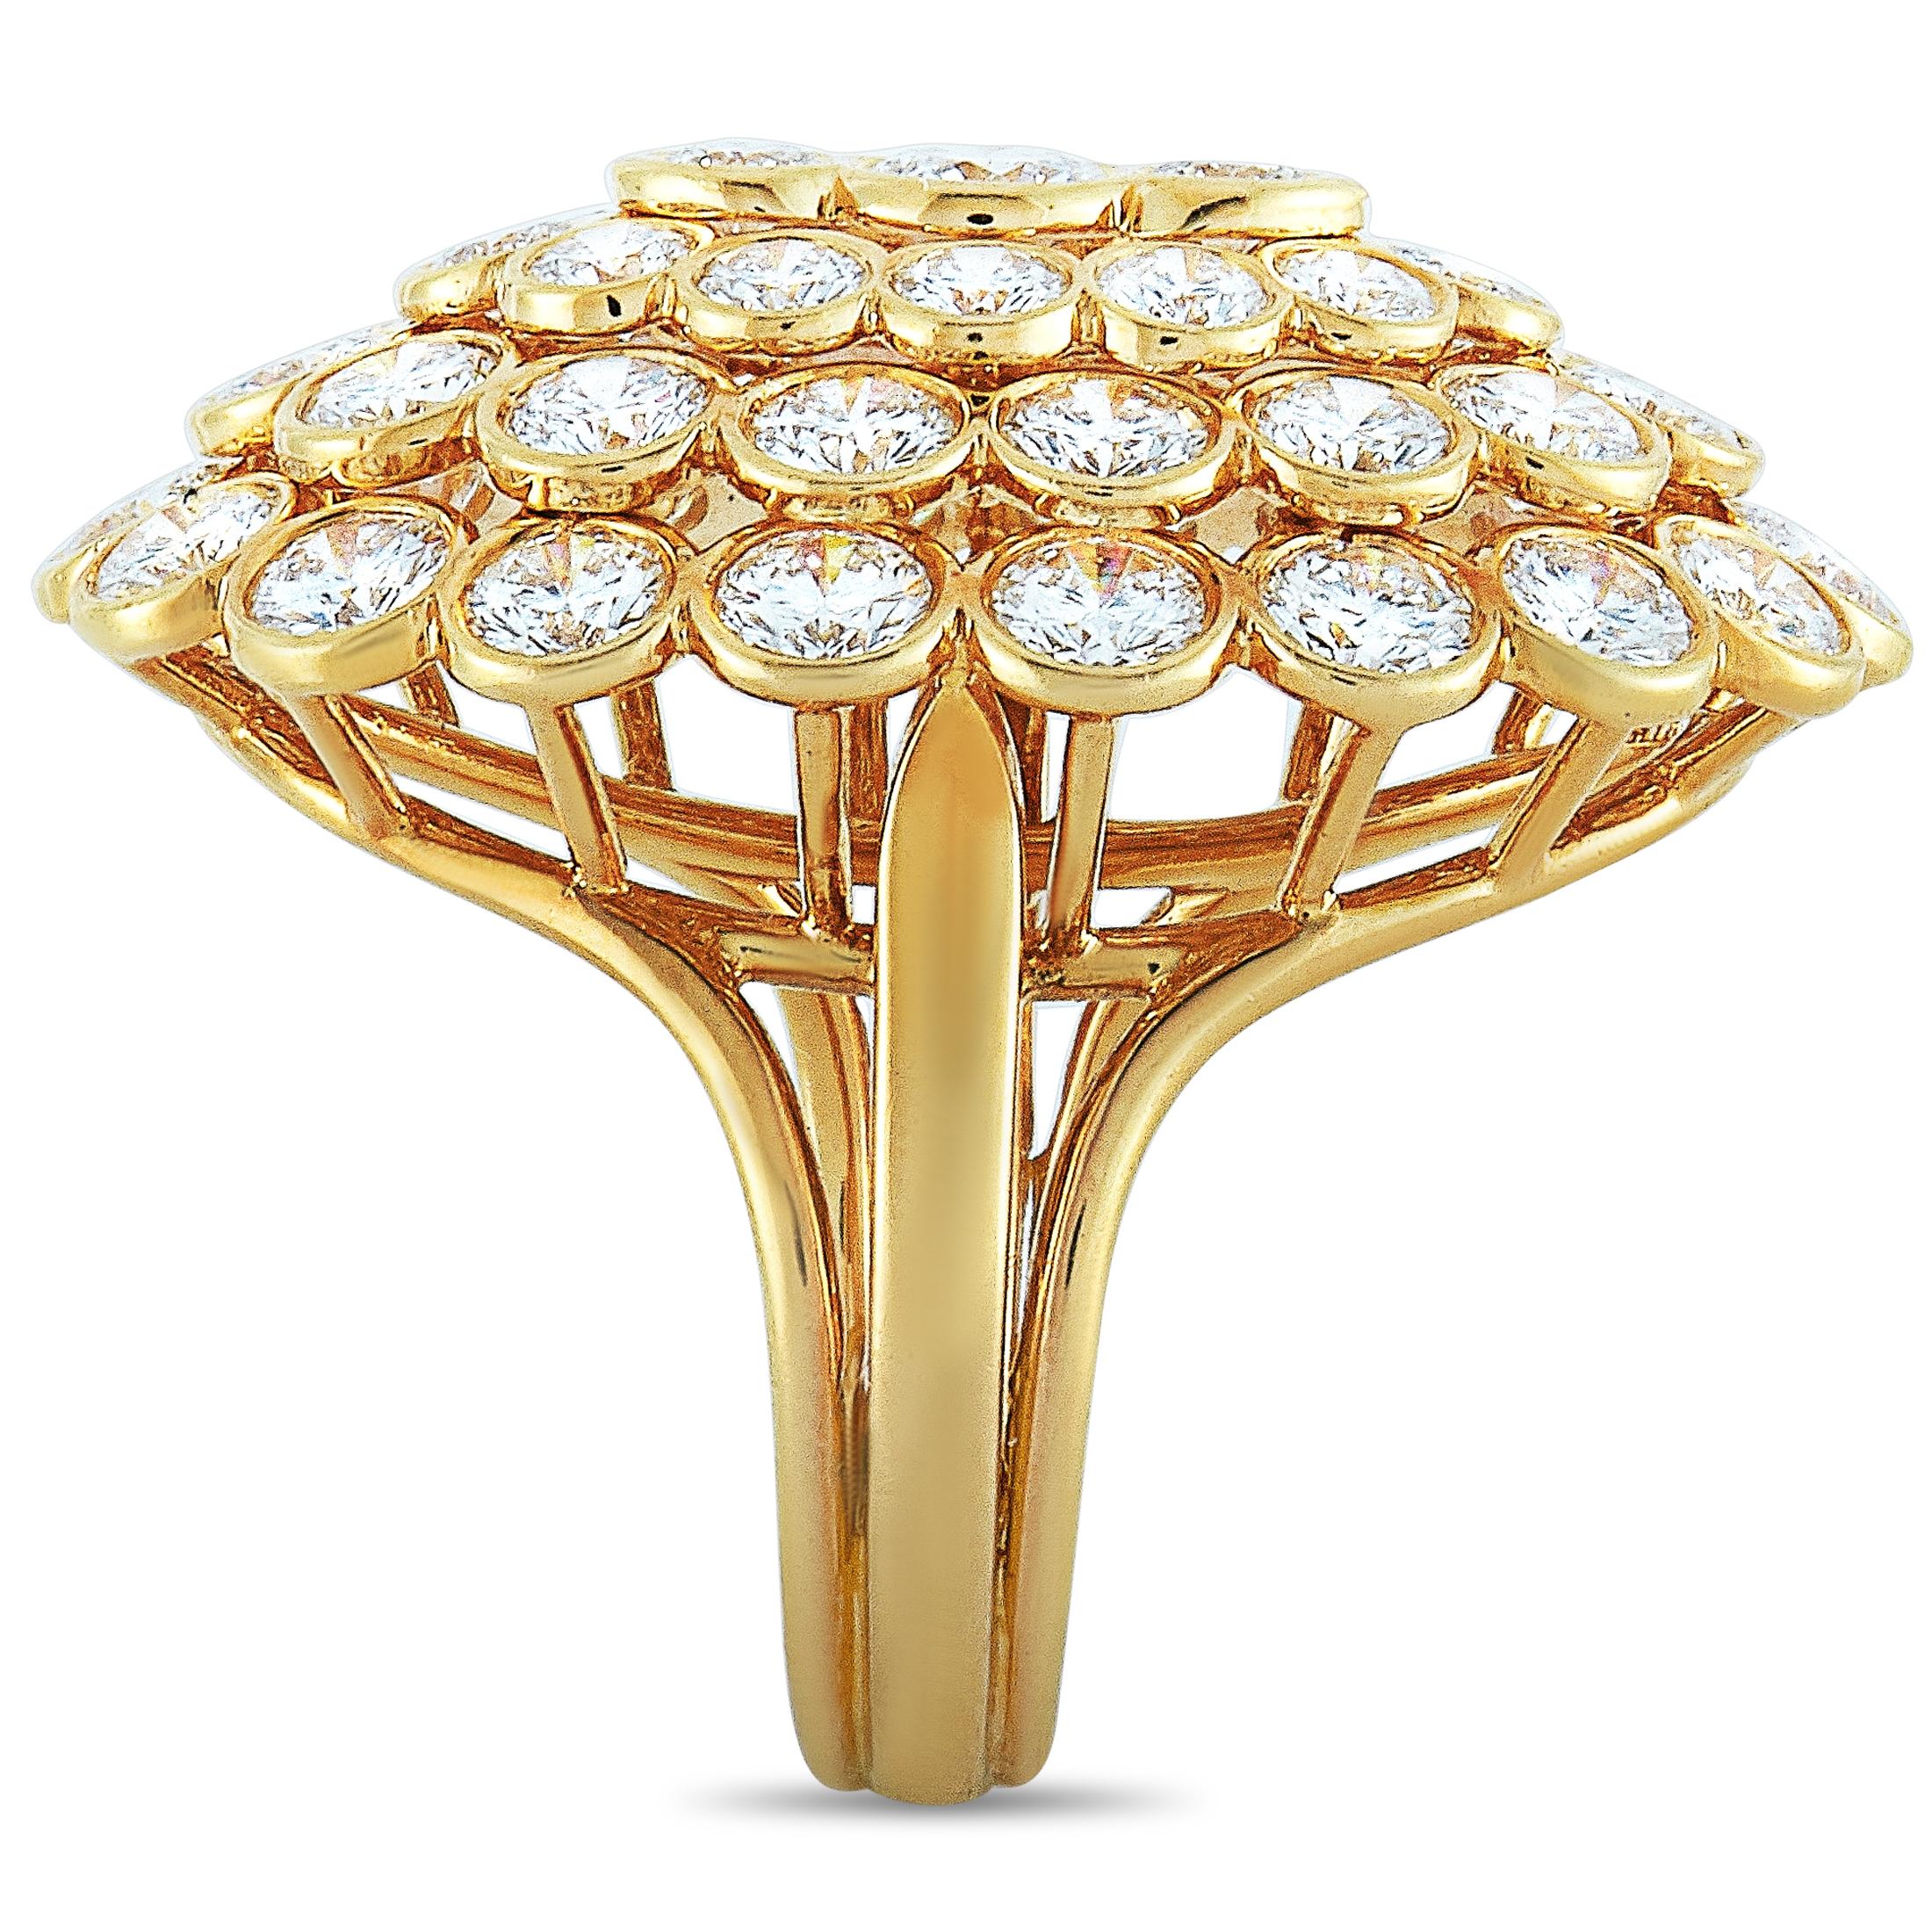 This Cartier ring is crafted from 18K yellow gold and weighs 11.1 grams, boasting band thickness of 4 mm and top height of 10 mm, while top dimensions measure 30 by 22 mm. The ring is embellished with diamonds that feature E-F color and VVS clarity